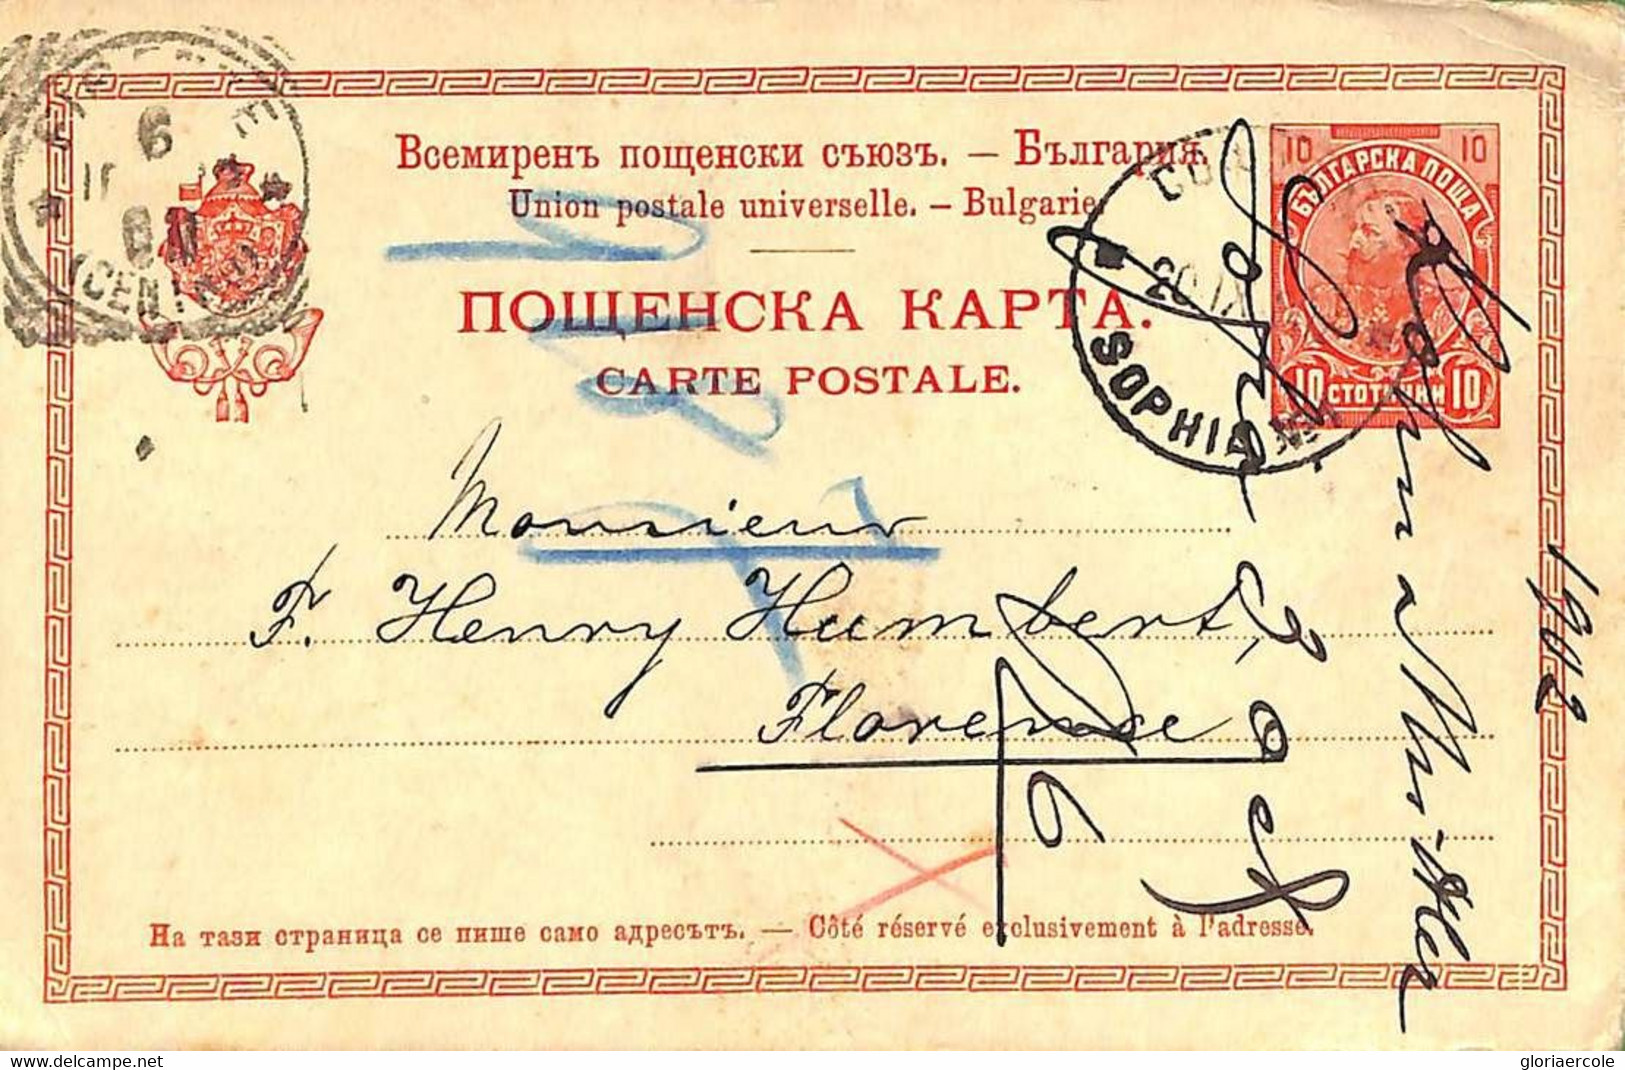 Ad5850 - BULGARIA - Postal History - STATIONERY CARD  To Italy 1902 - Postcards